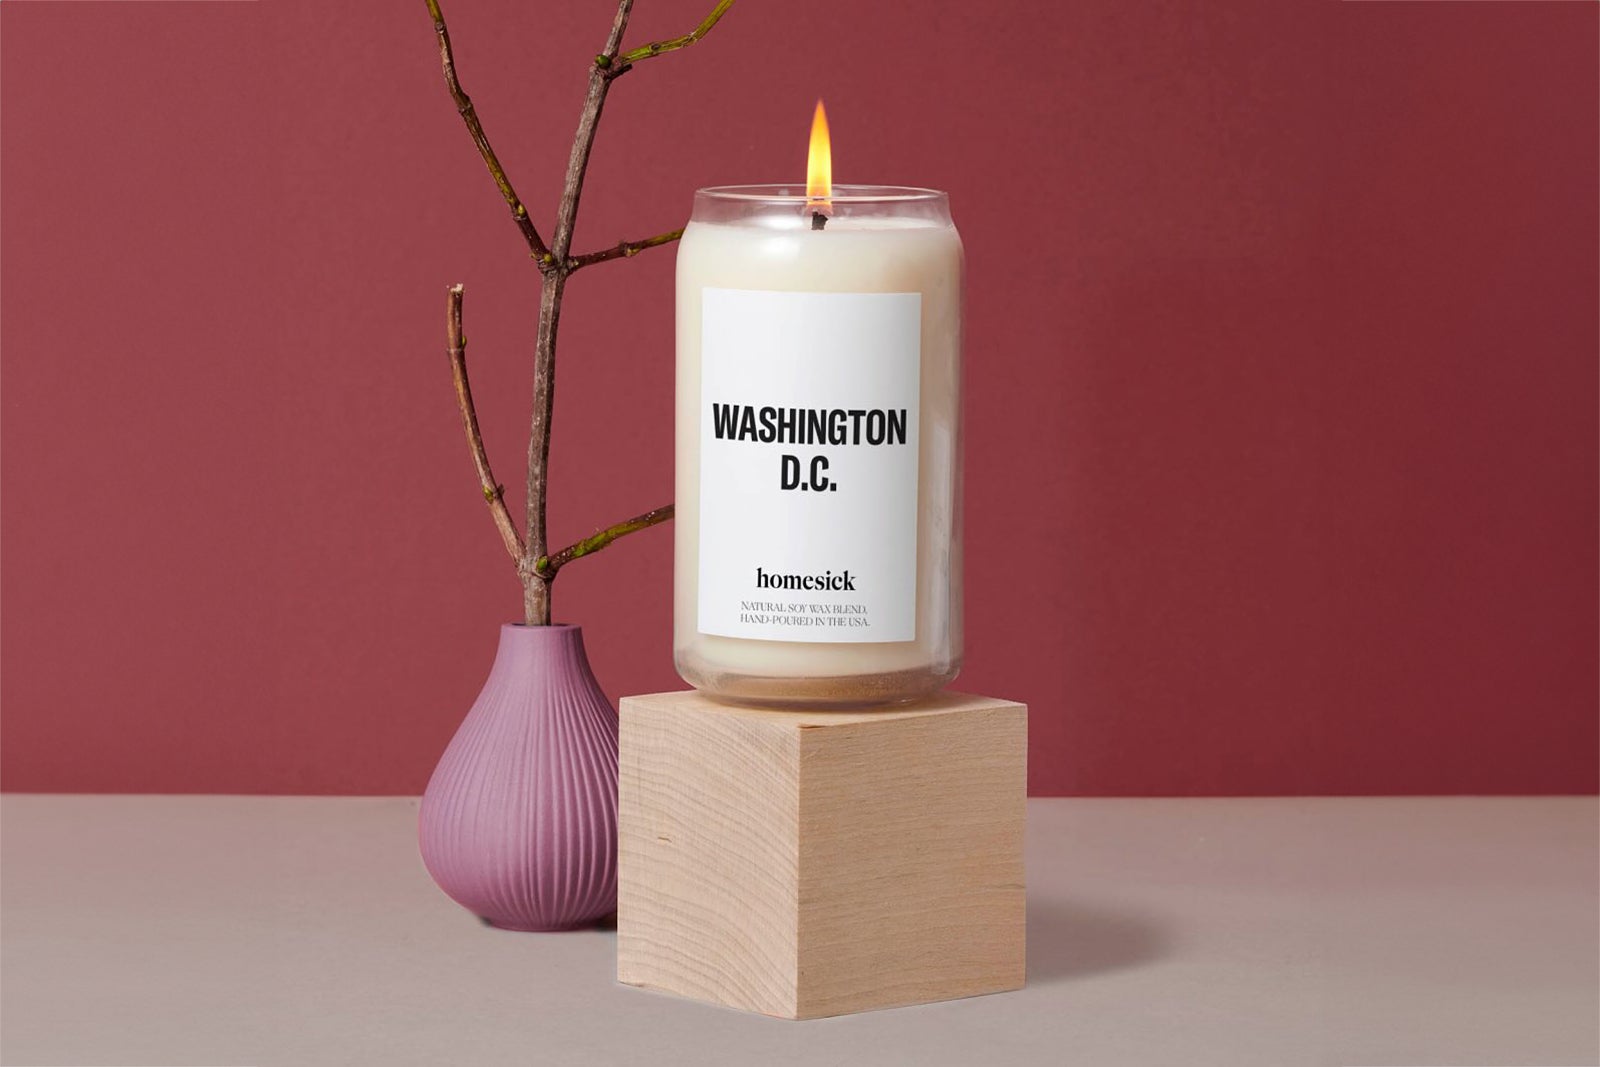 a white candle in a glass jar with "Washington D.C." on the label